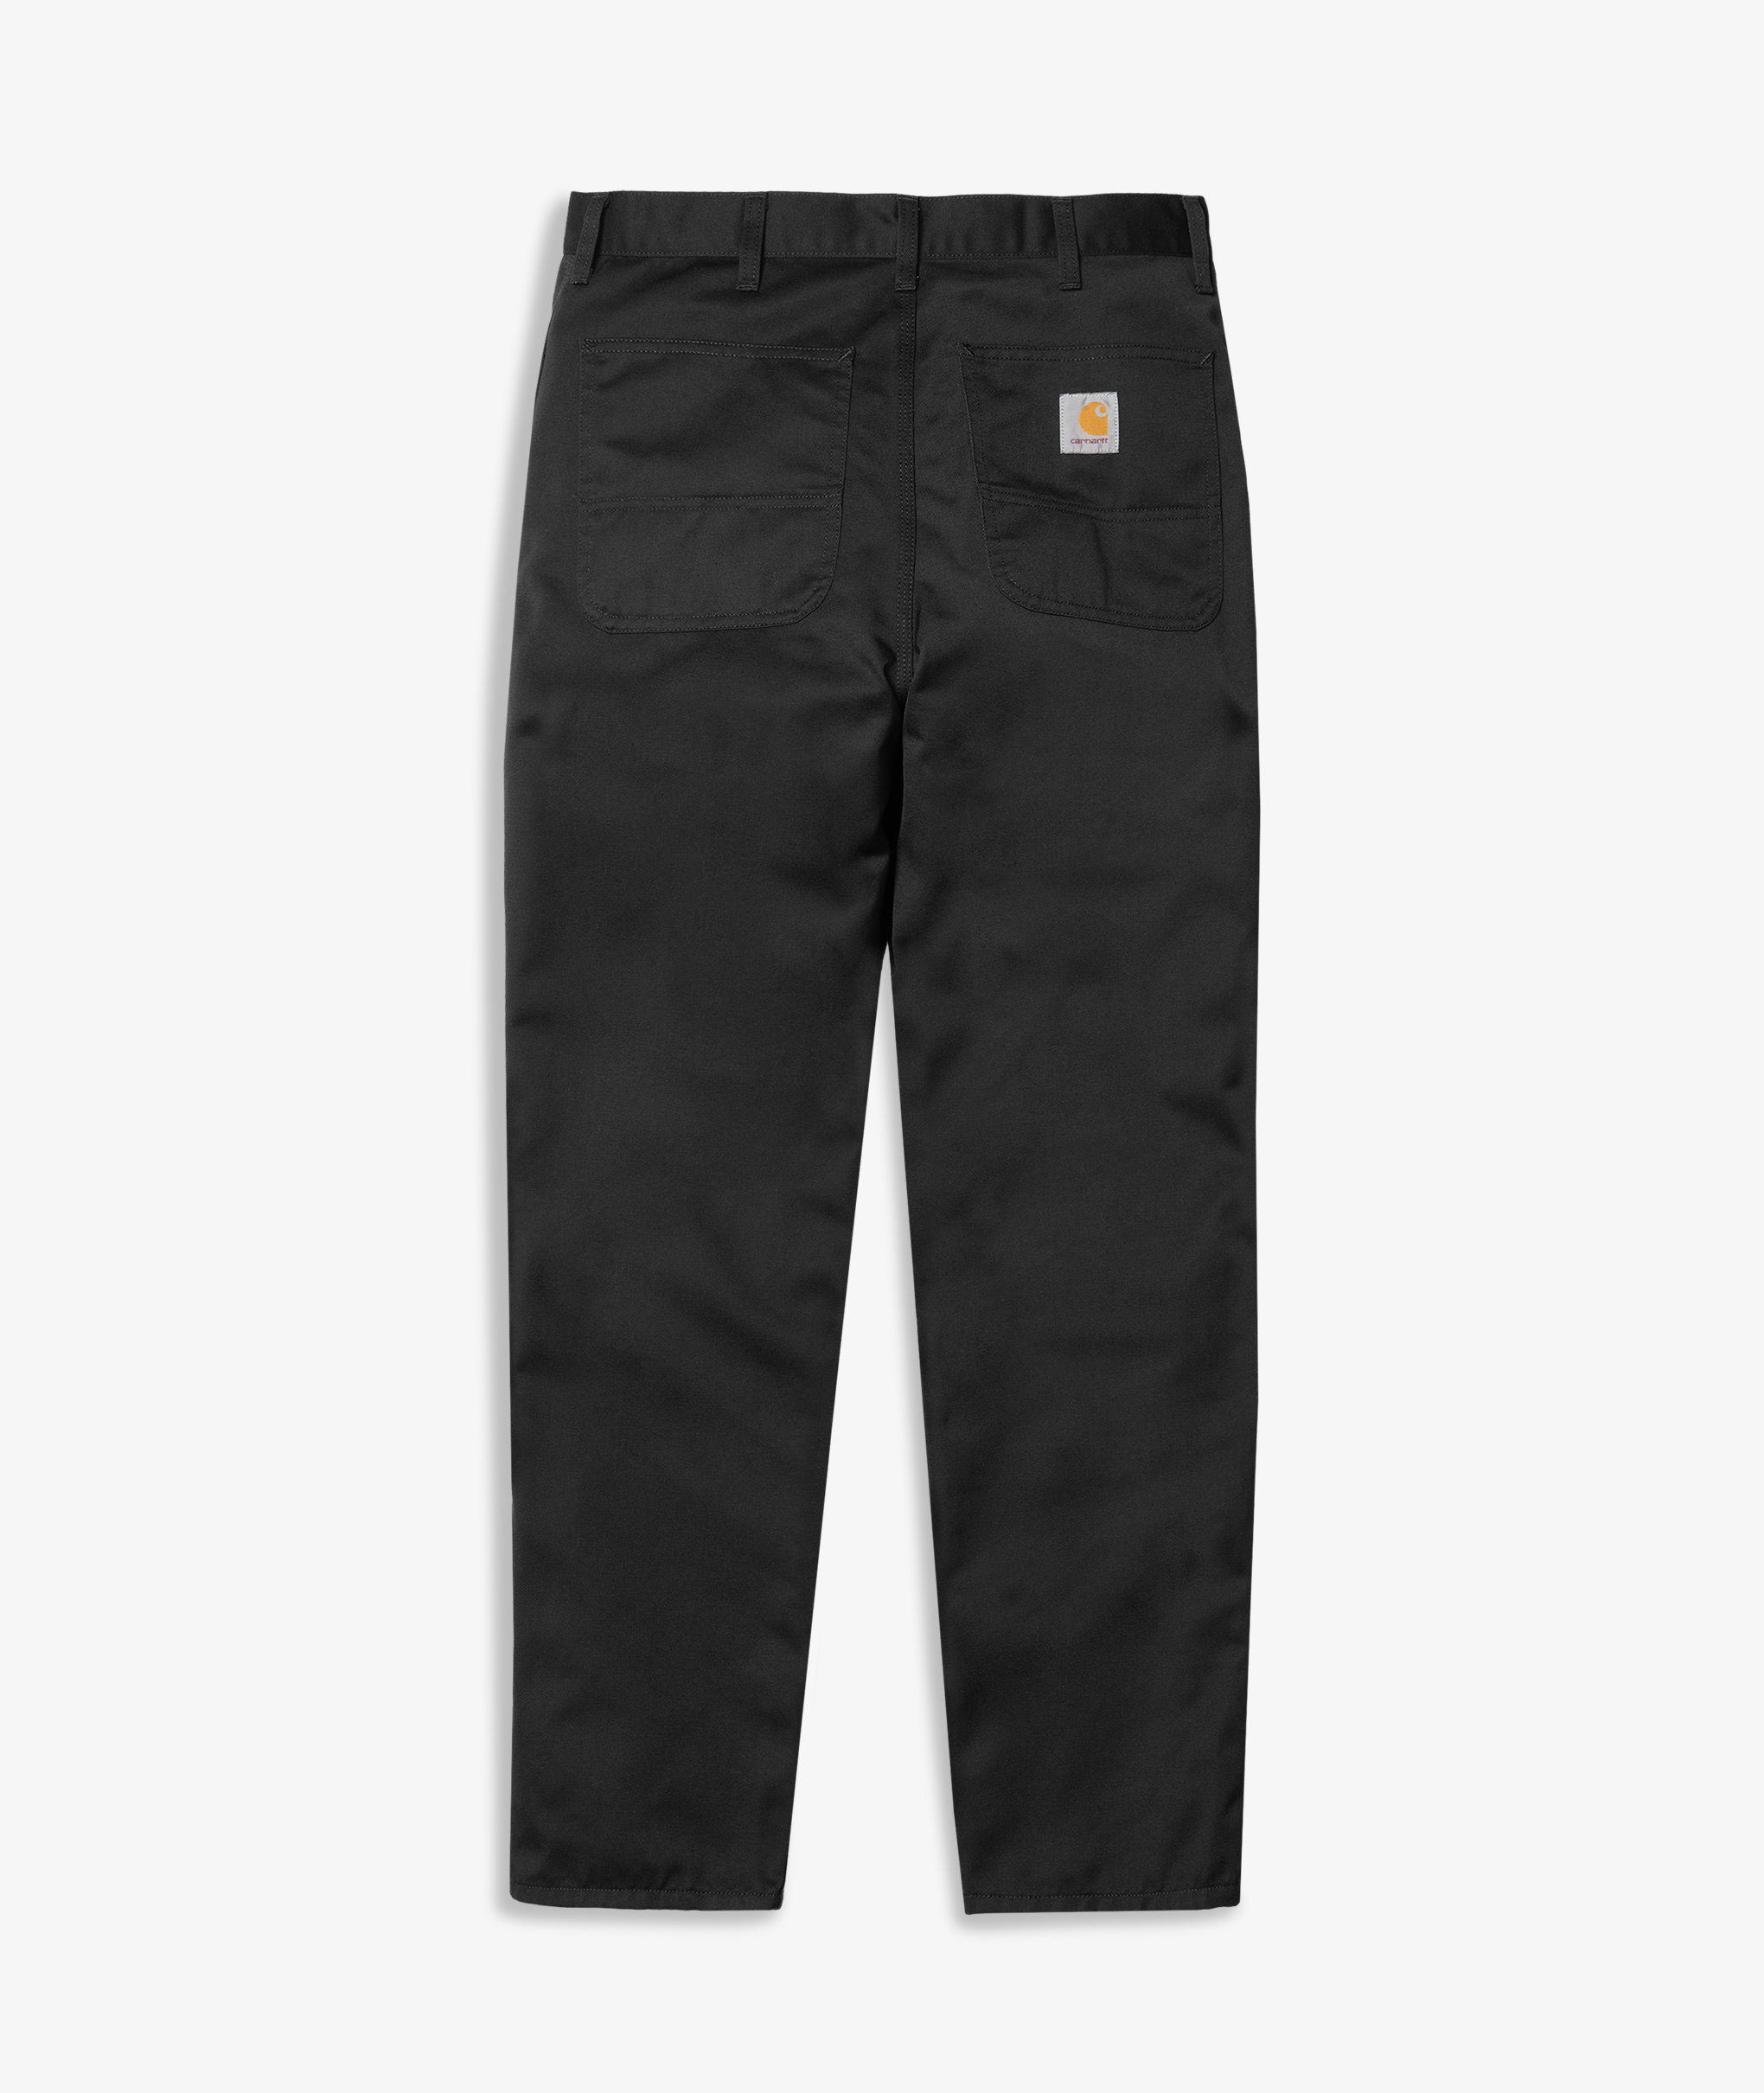 Norse Store | Shipping Worldwide - Carhartt WIP Simple Pant - Black Rinsed